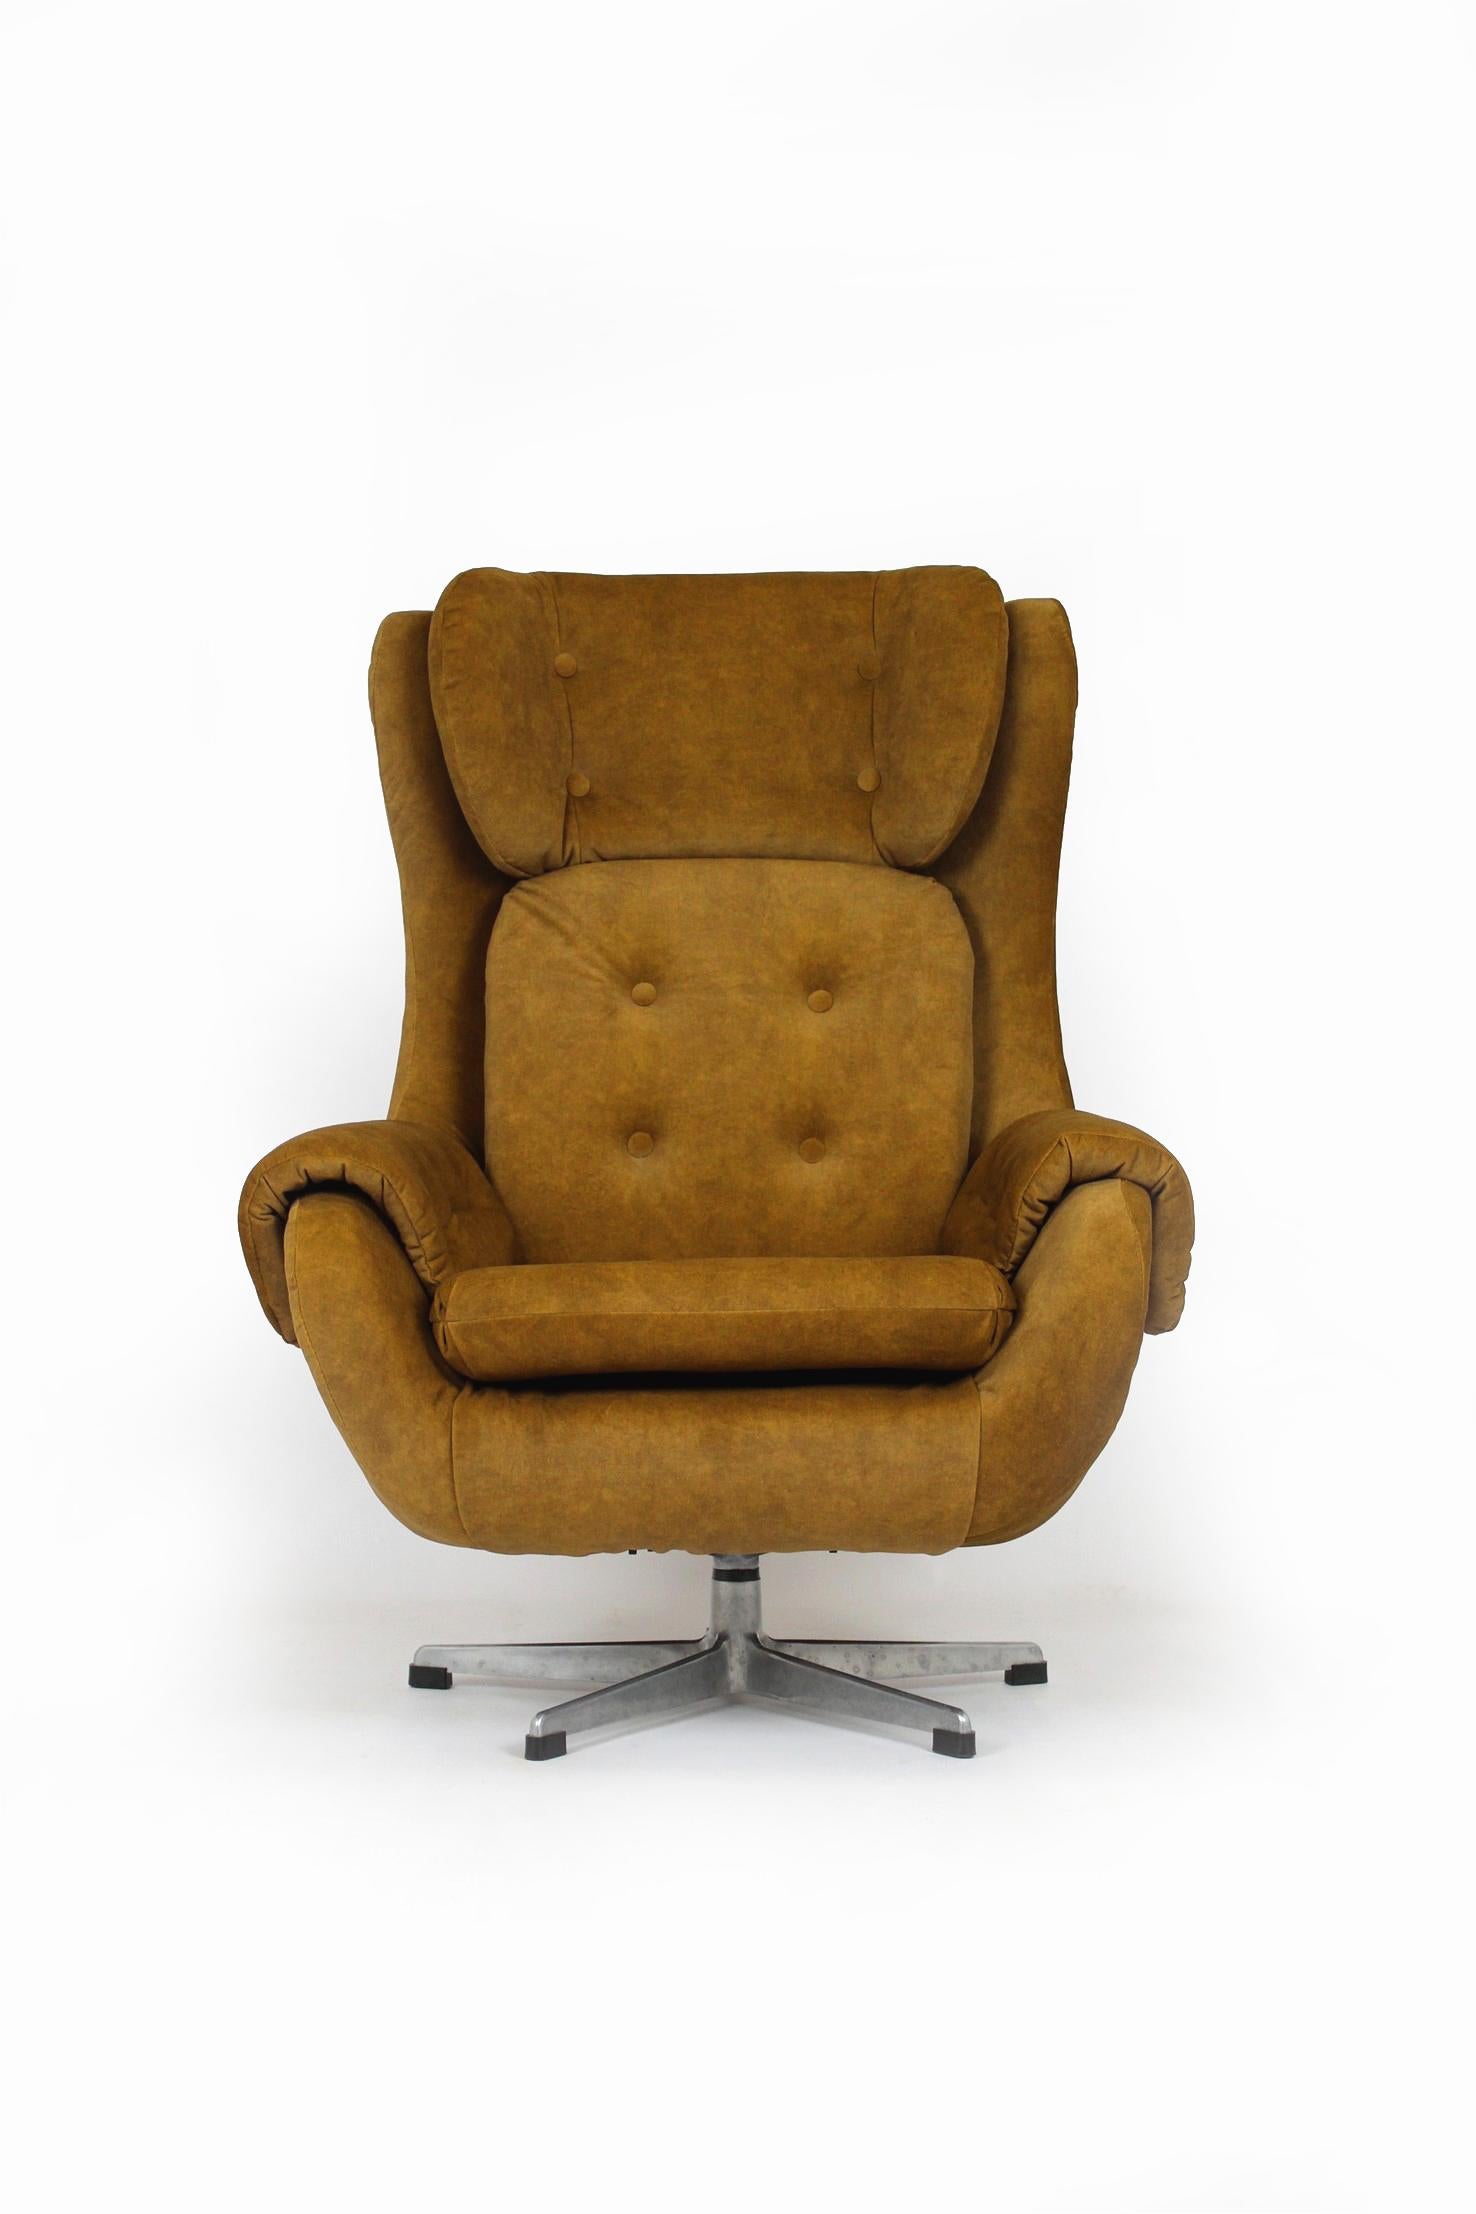 This wing swivel lounge chair was produced by UP Zavody Rousinov in the 1970s in former Czechoslovakia. The armchair has been restored, has new foams and is upholstered in high-quality fabric.

 